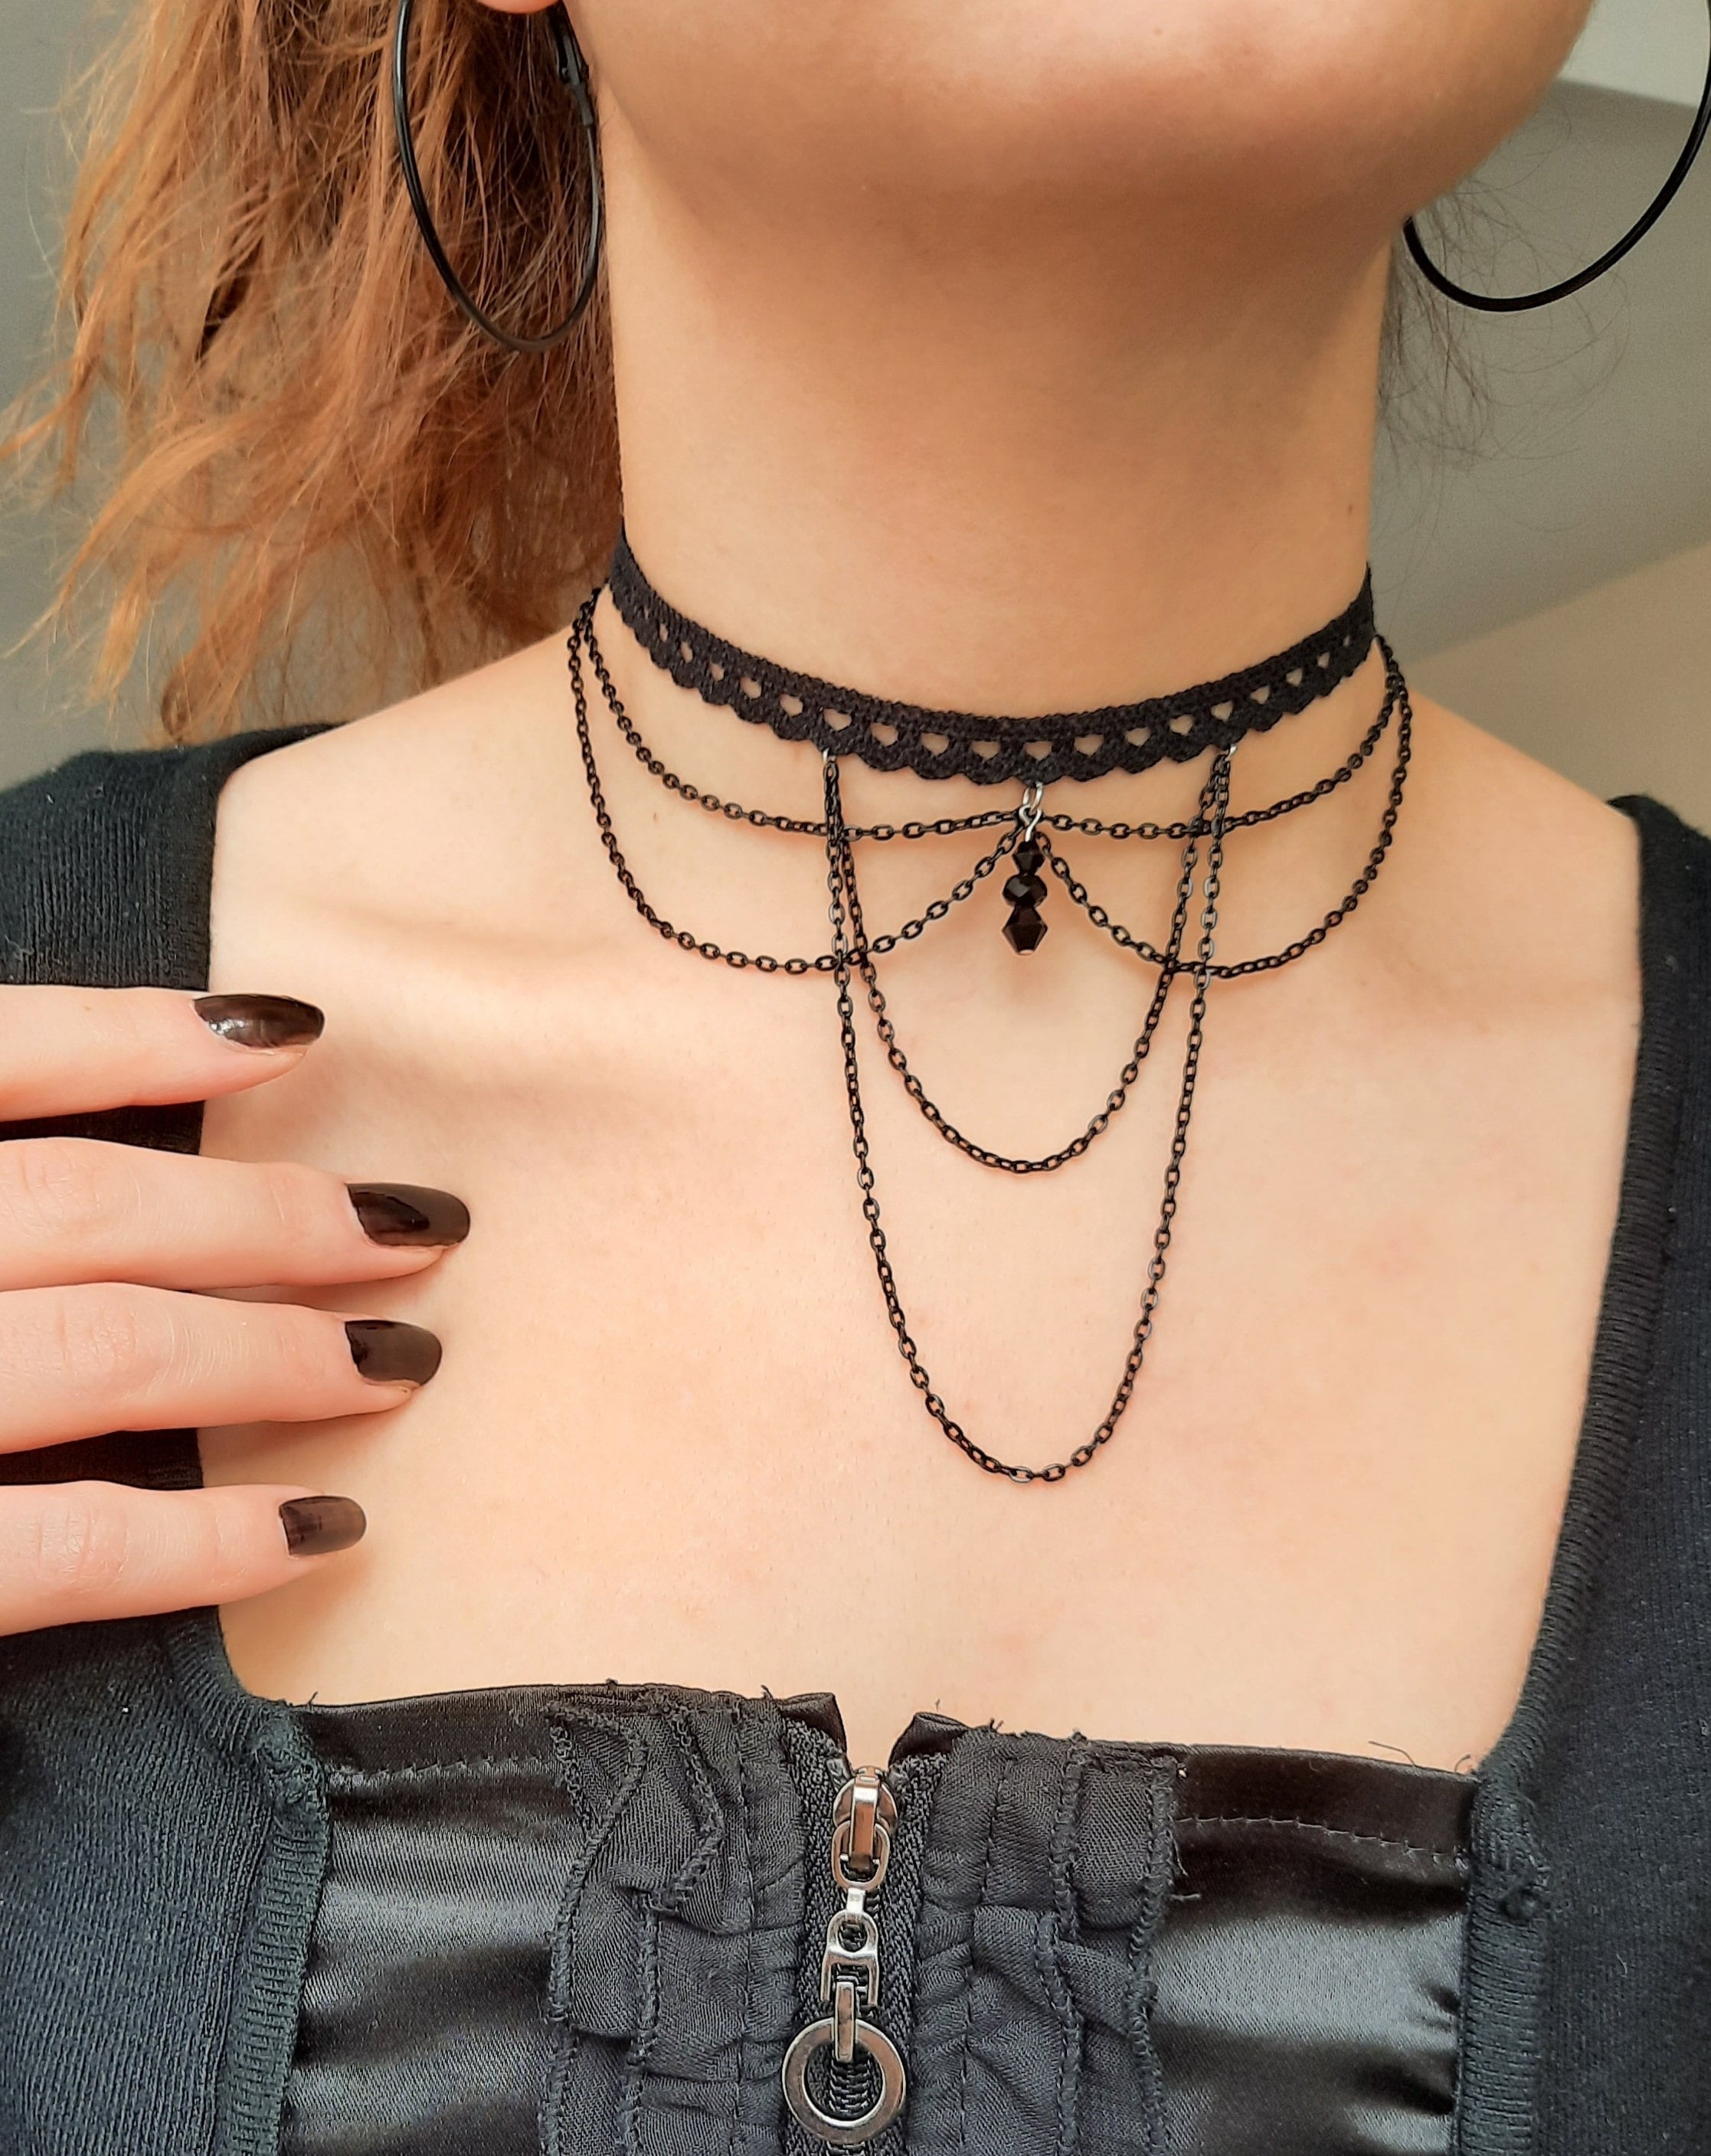 Lace Choker Necklace With Beads Chain Pendants Gothic Jewelry For Woman  Girl - Black